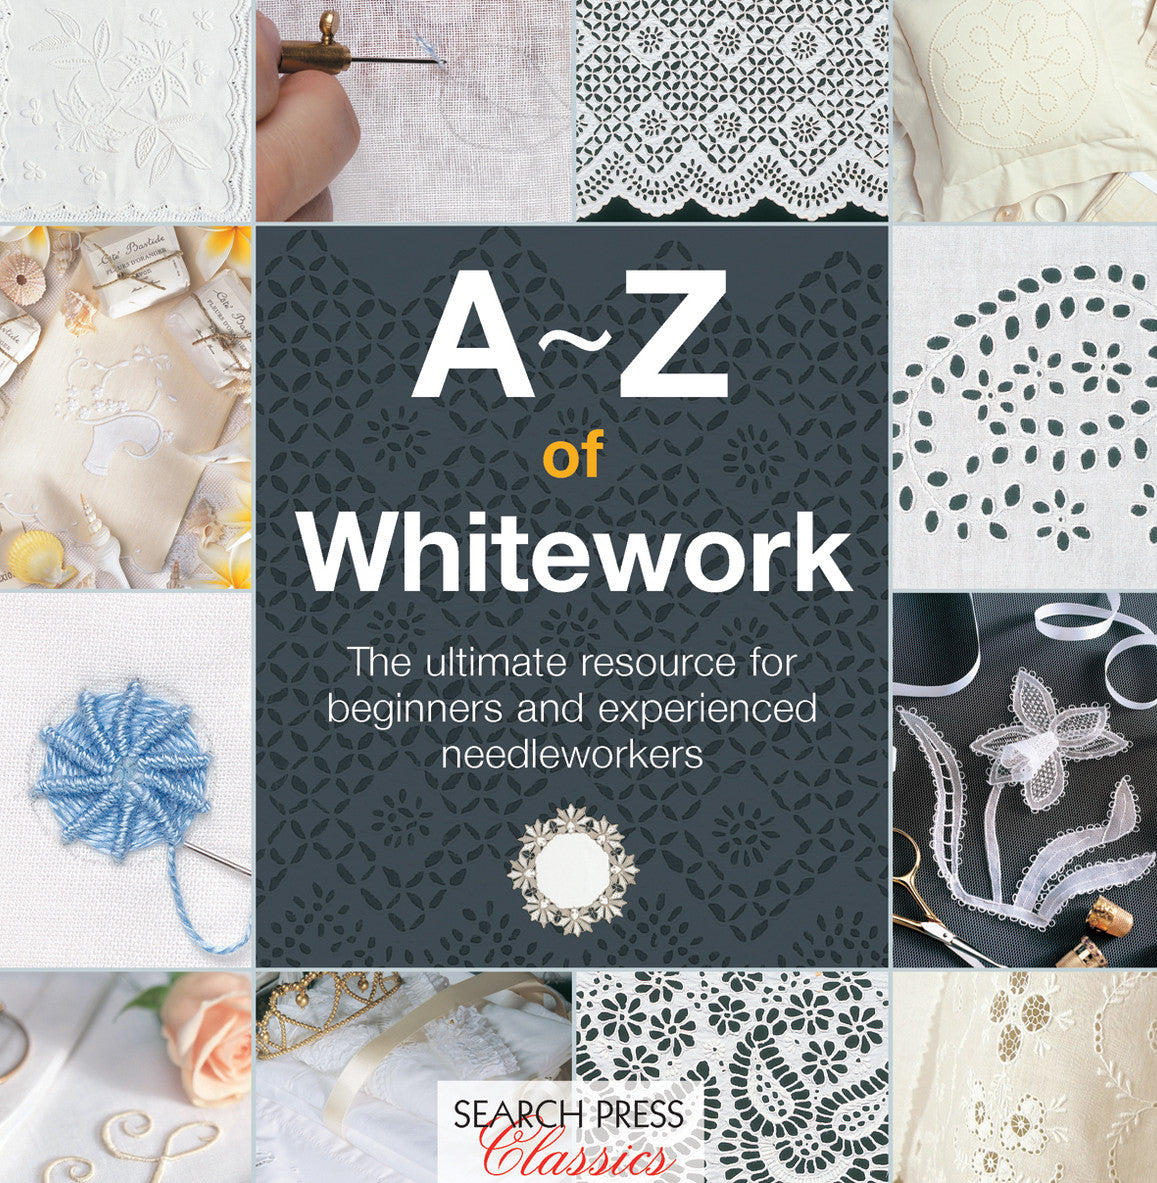 A-Z of Whitework Book by Country Bumpkin